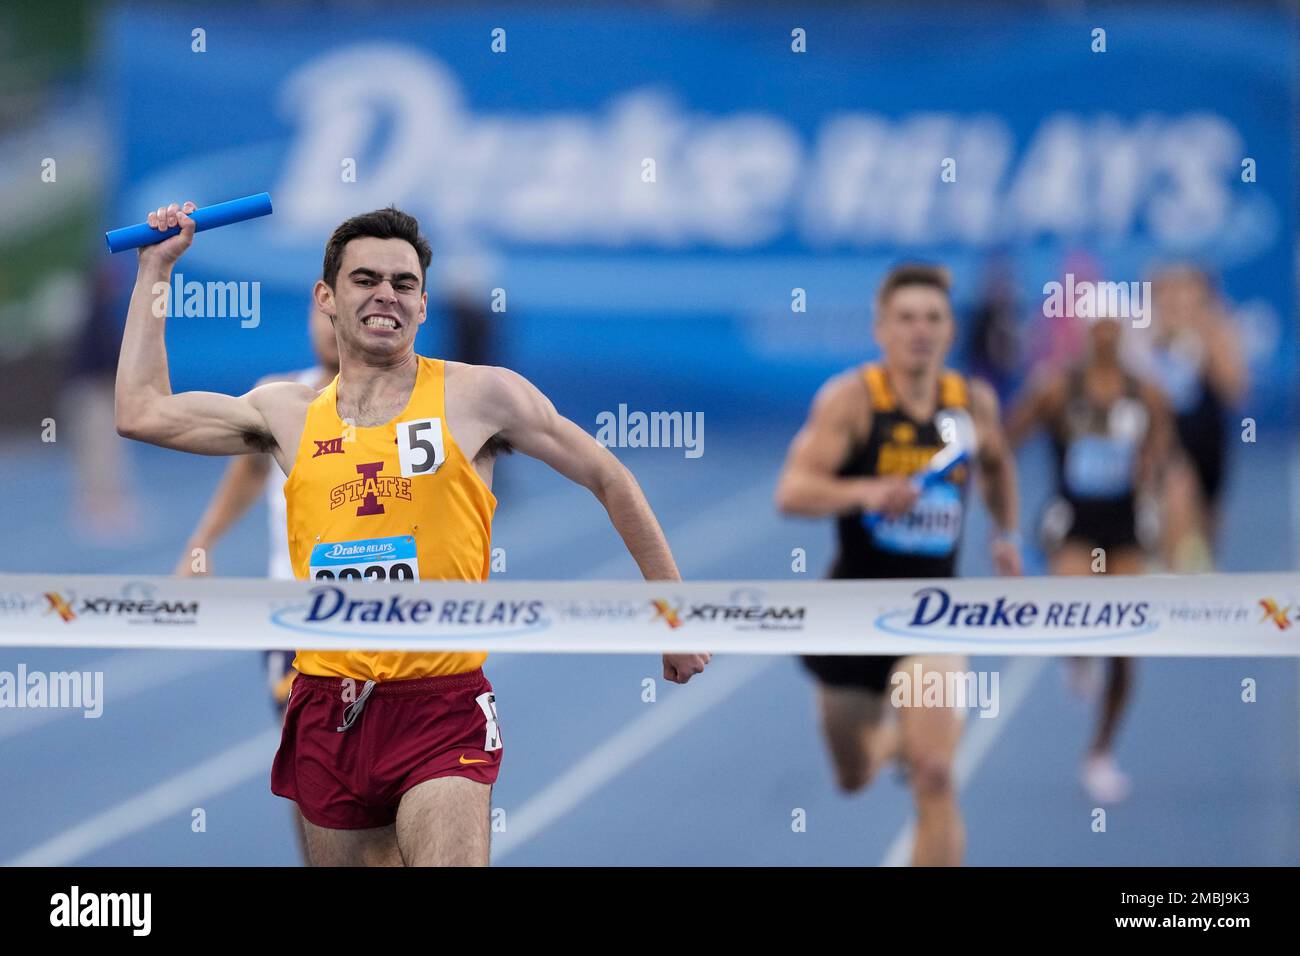 Iowa States Jason Gomez anchors his team to victory in the 4 x 800-meter relay at the Drake Relays athletics meet, Friday, April 29, 2022, in Des Moines, Iowa